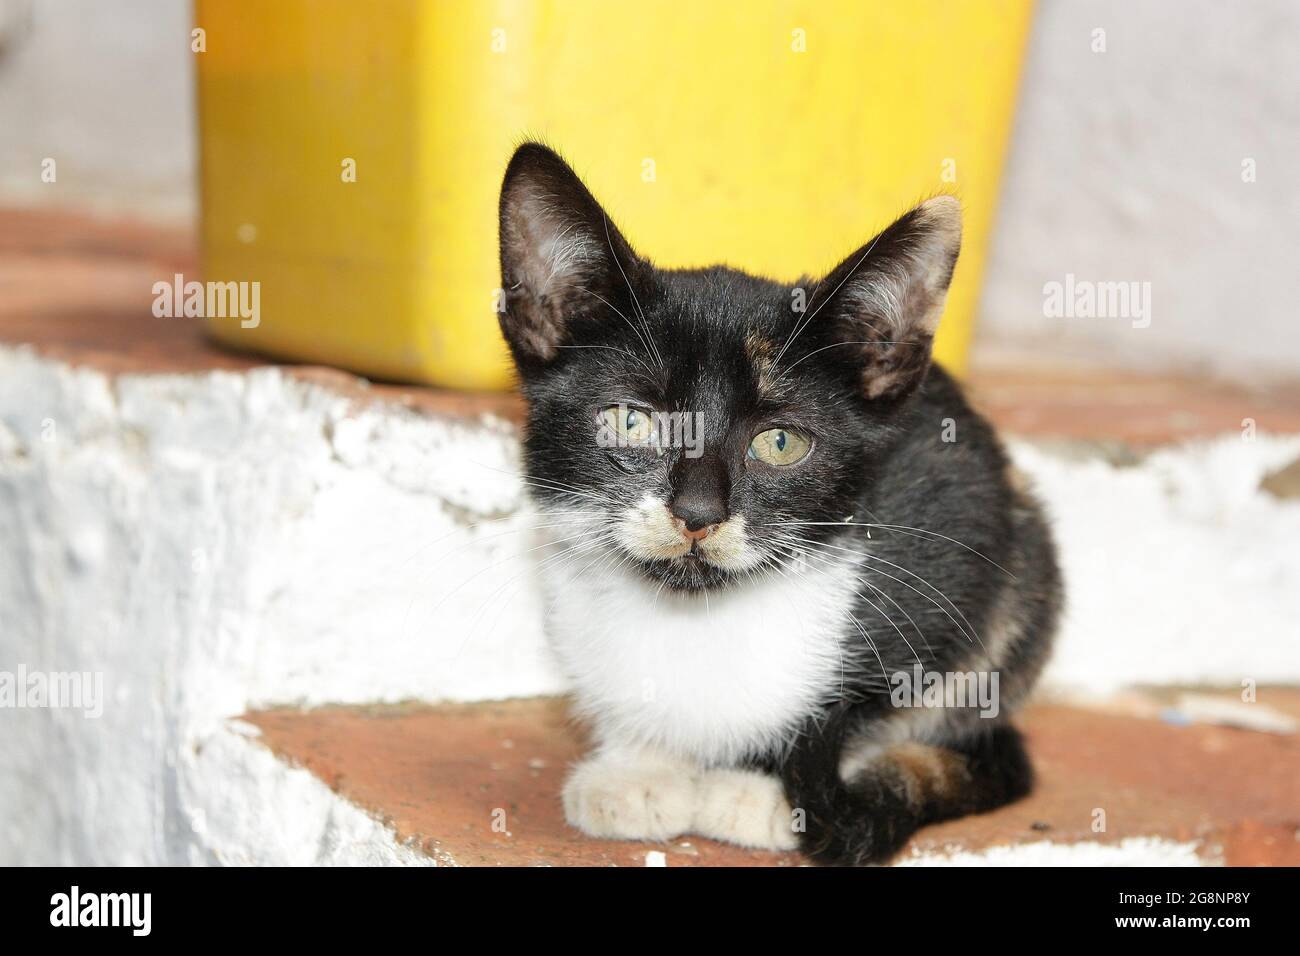 Little stray cat with green eyes. Kitten shot. The concept of tabby stray cats and lifestyle. Stock Photo